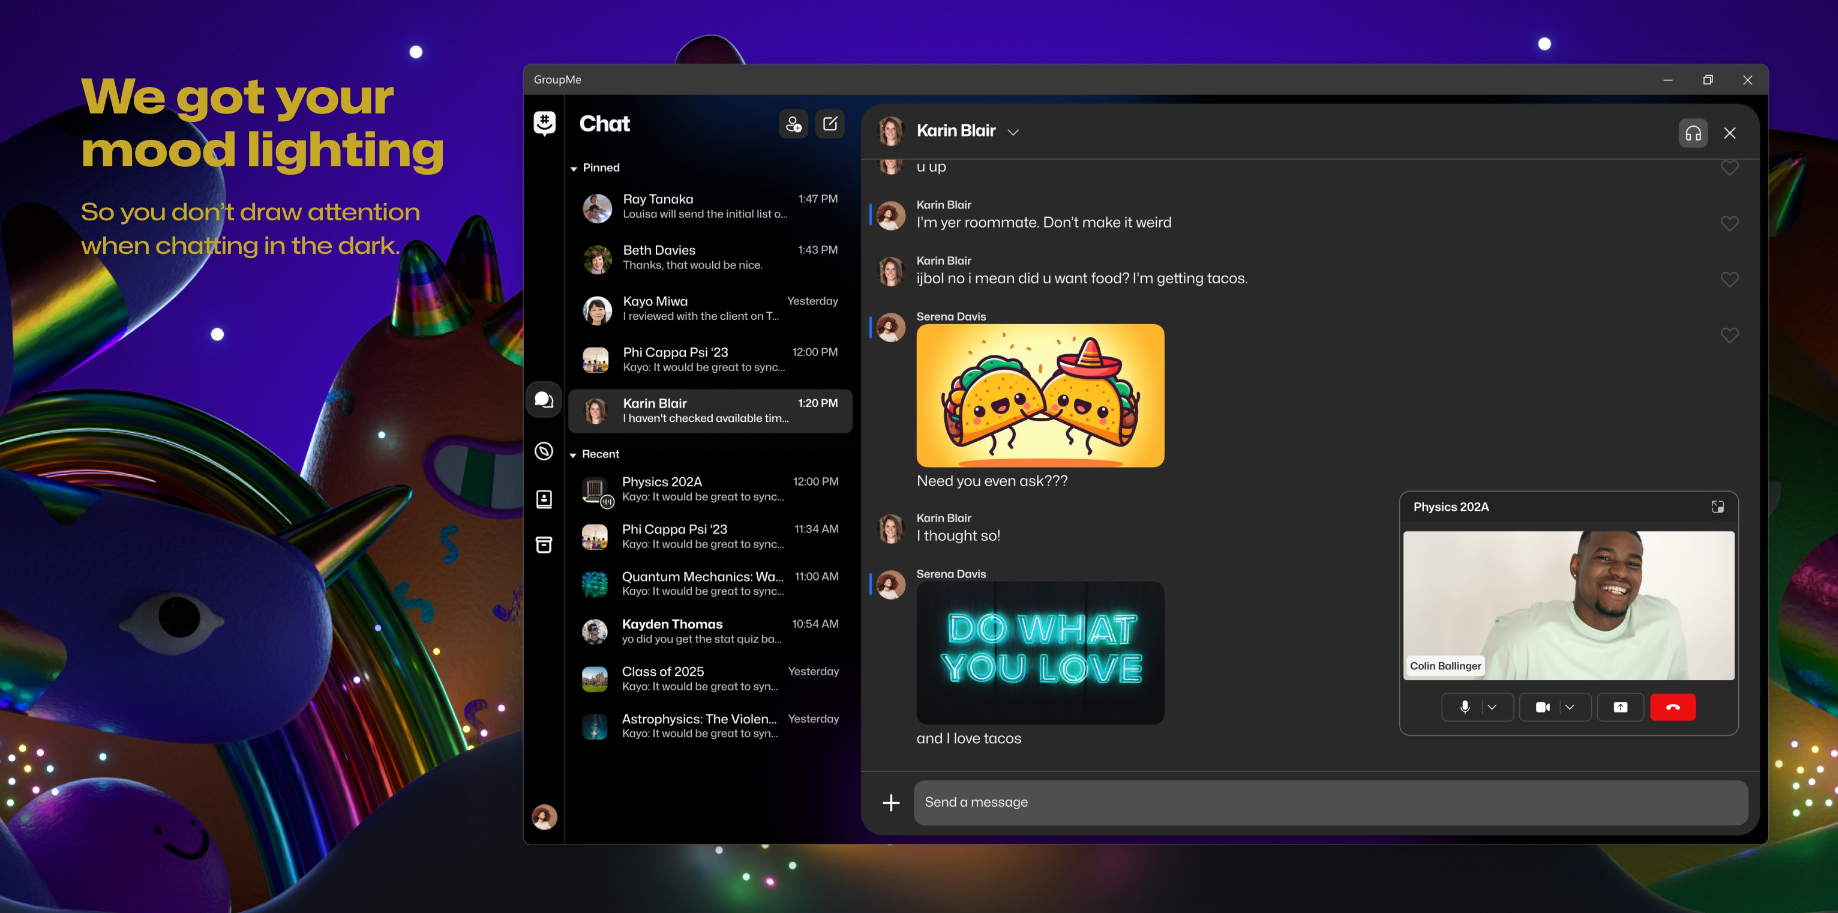 Microsoft's GroupMe now has a Windows 11 app with Copilot, in case you had forgotten it exists